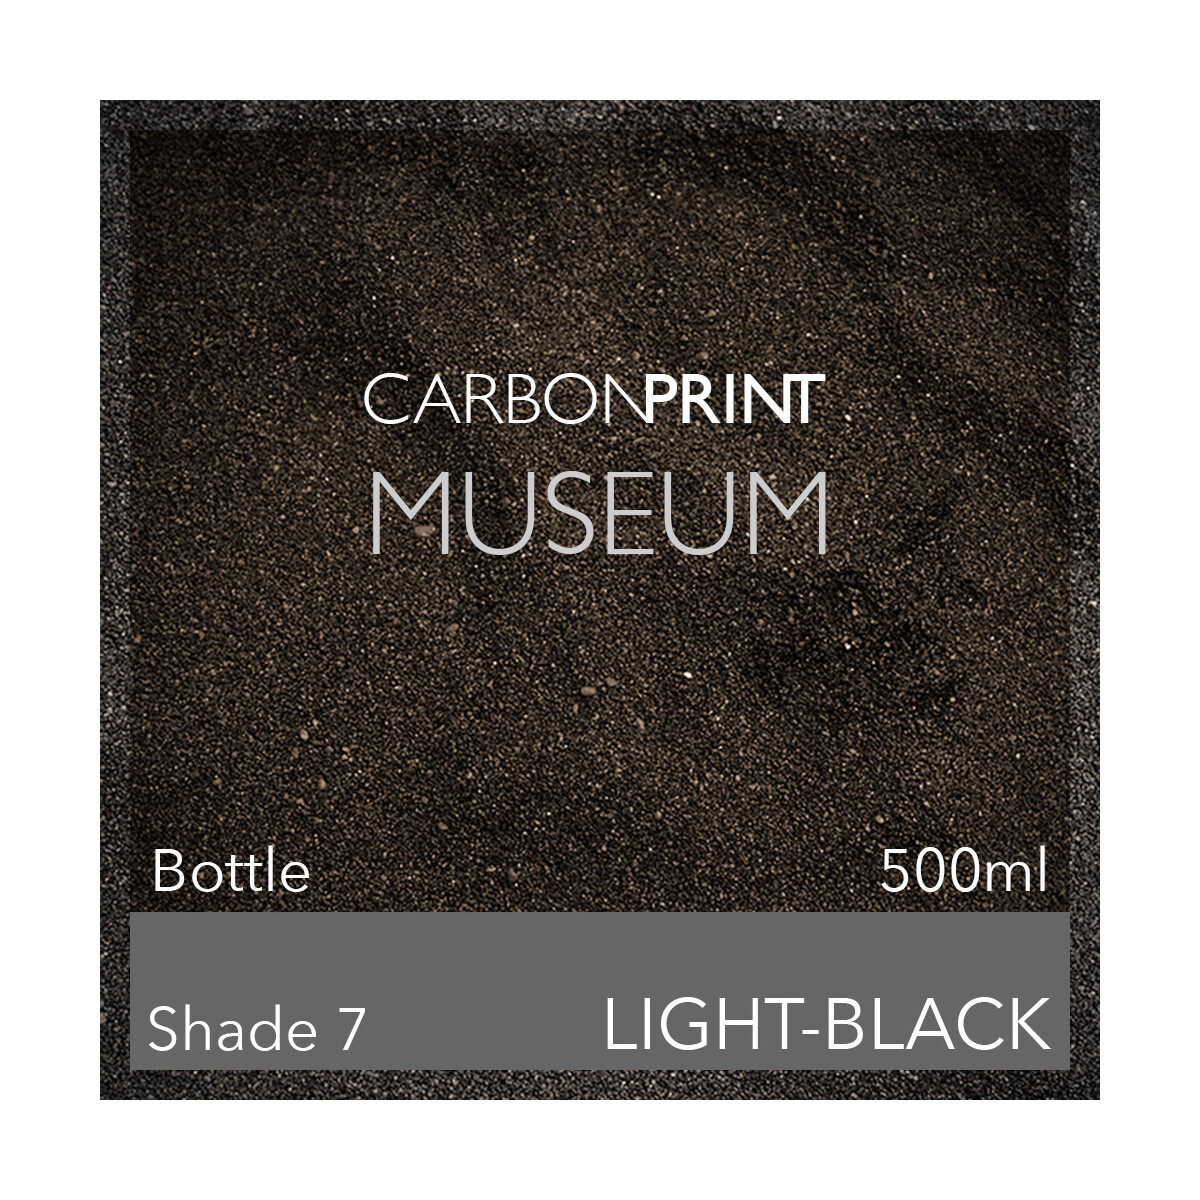 Carbonprint Museum Shade7 Channel LK / GY 500ml